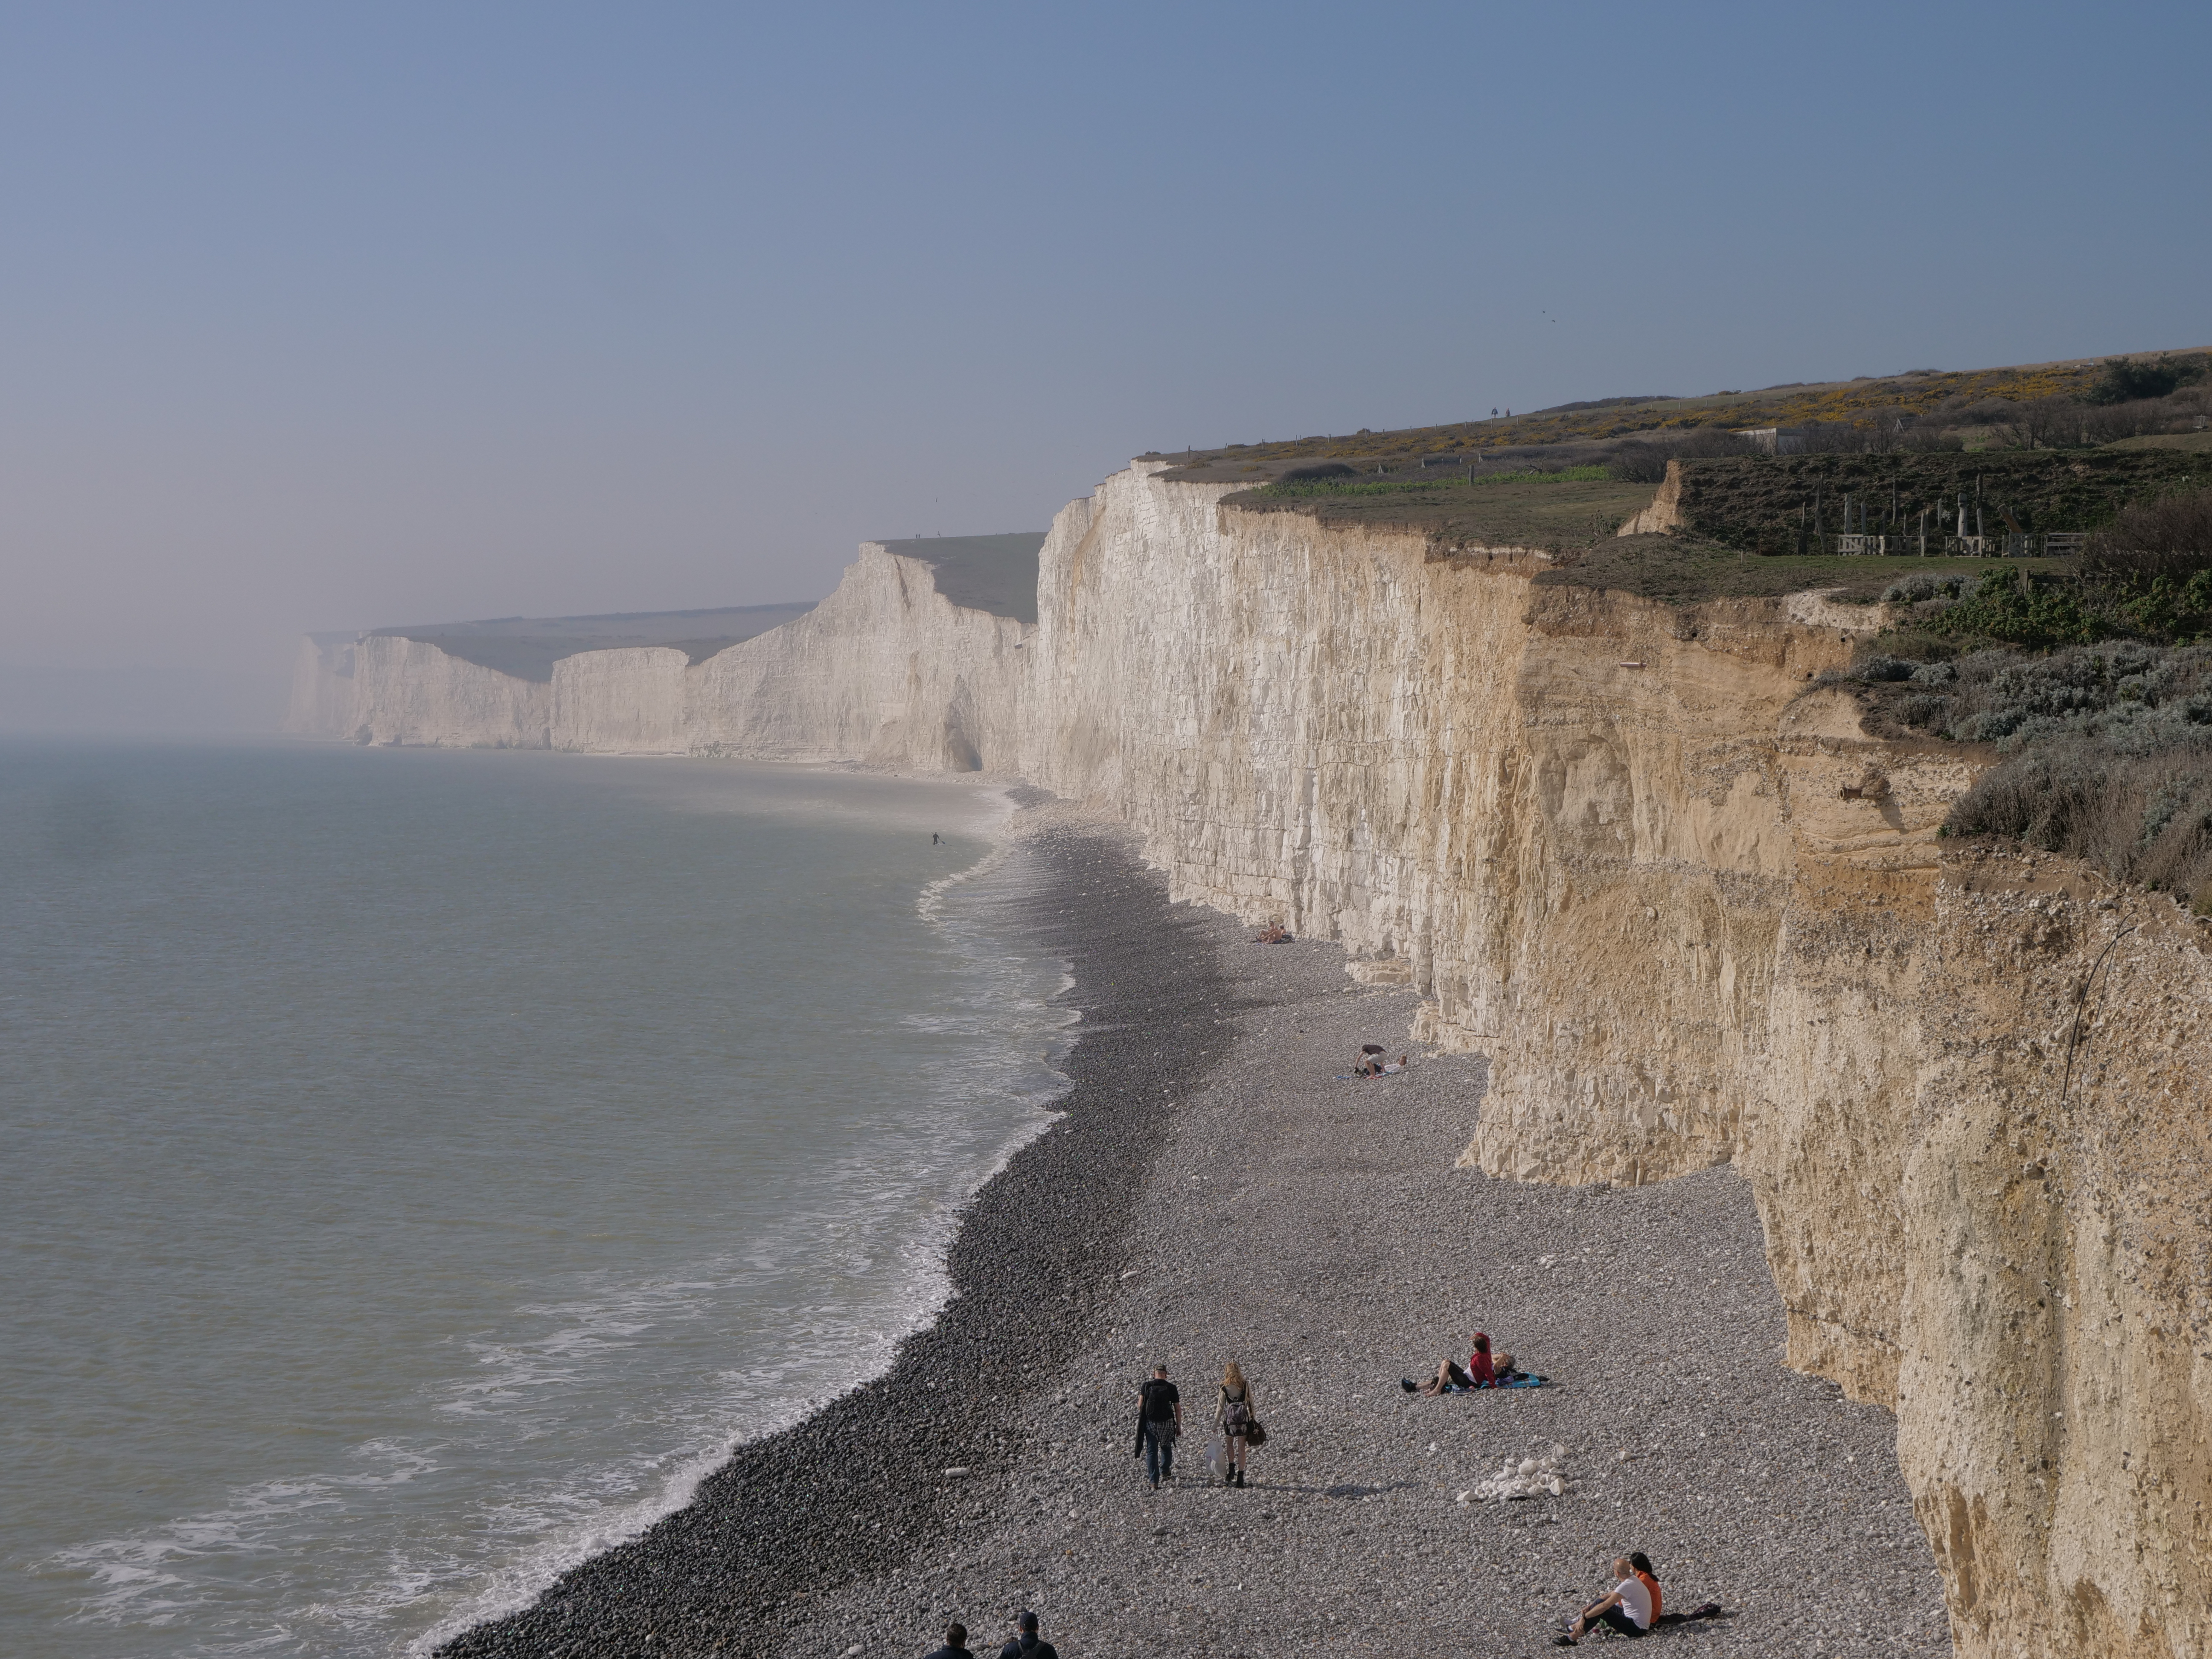 The White Cliffs in England as part of a day trip for a solo female traveler from London